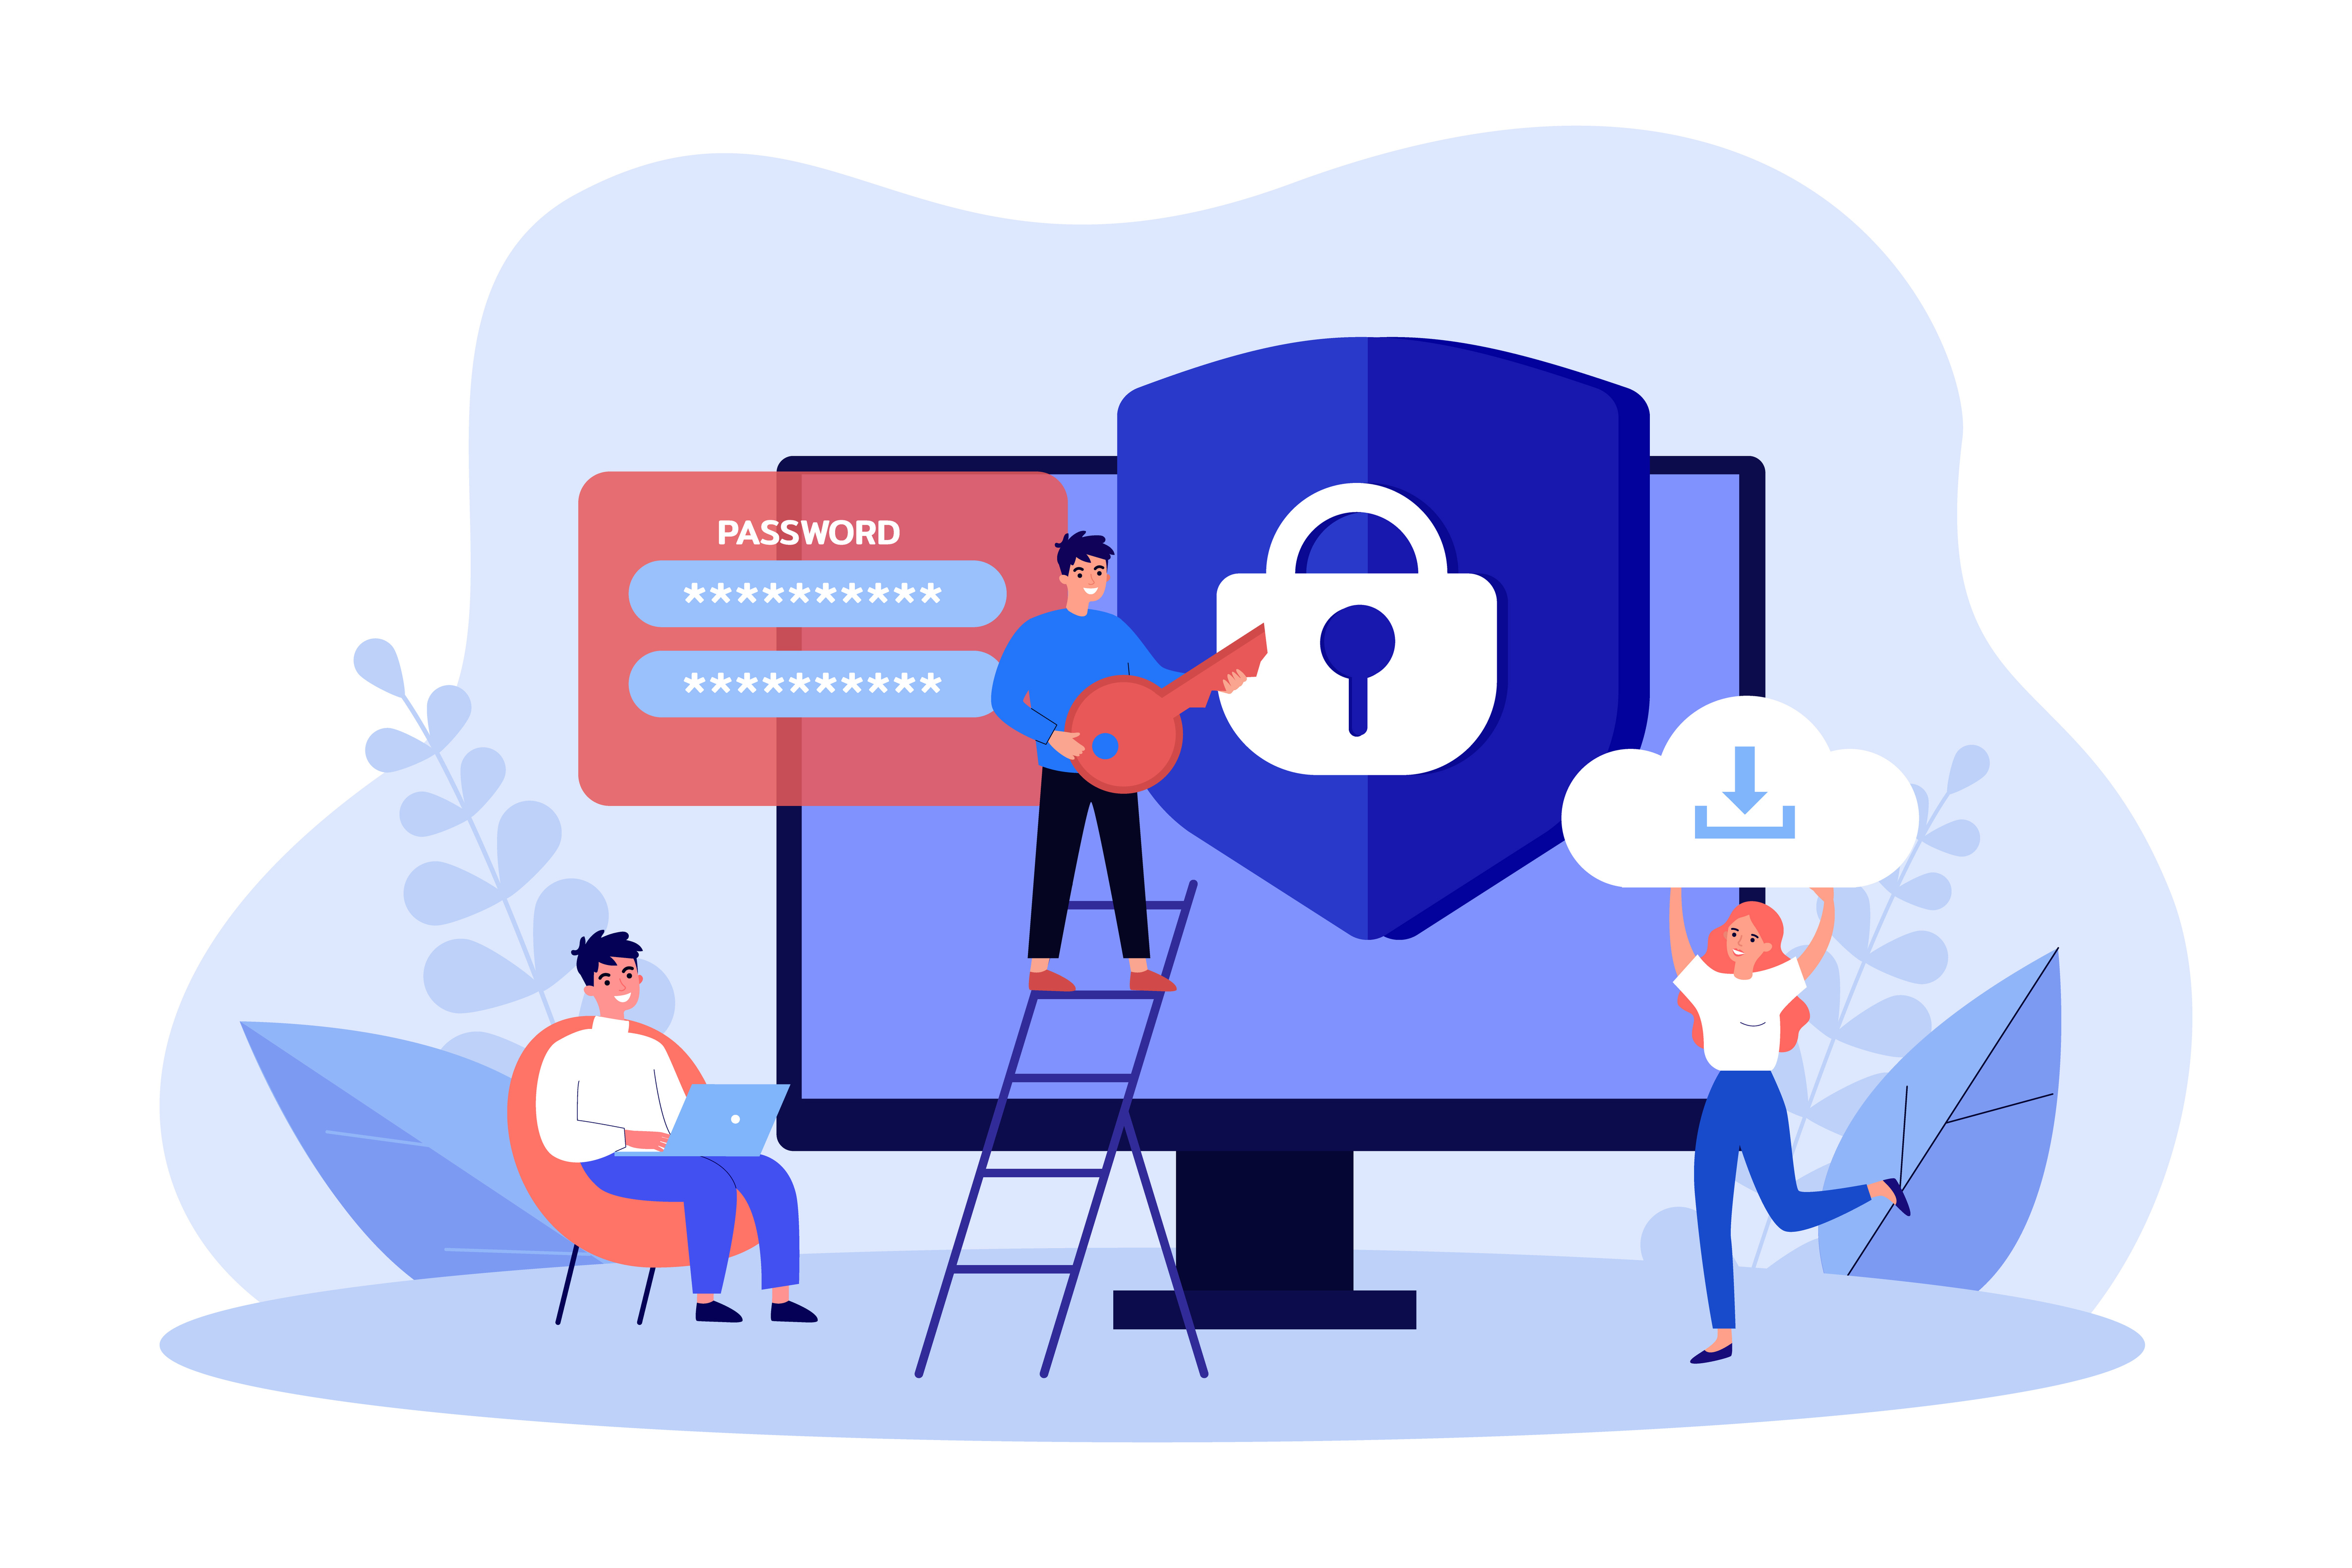 Featured image: Cartoon password protection - Read full post: How secure is your Password? Our top 3 password hygiene tips.